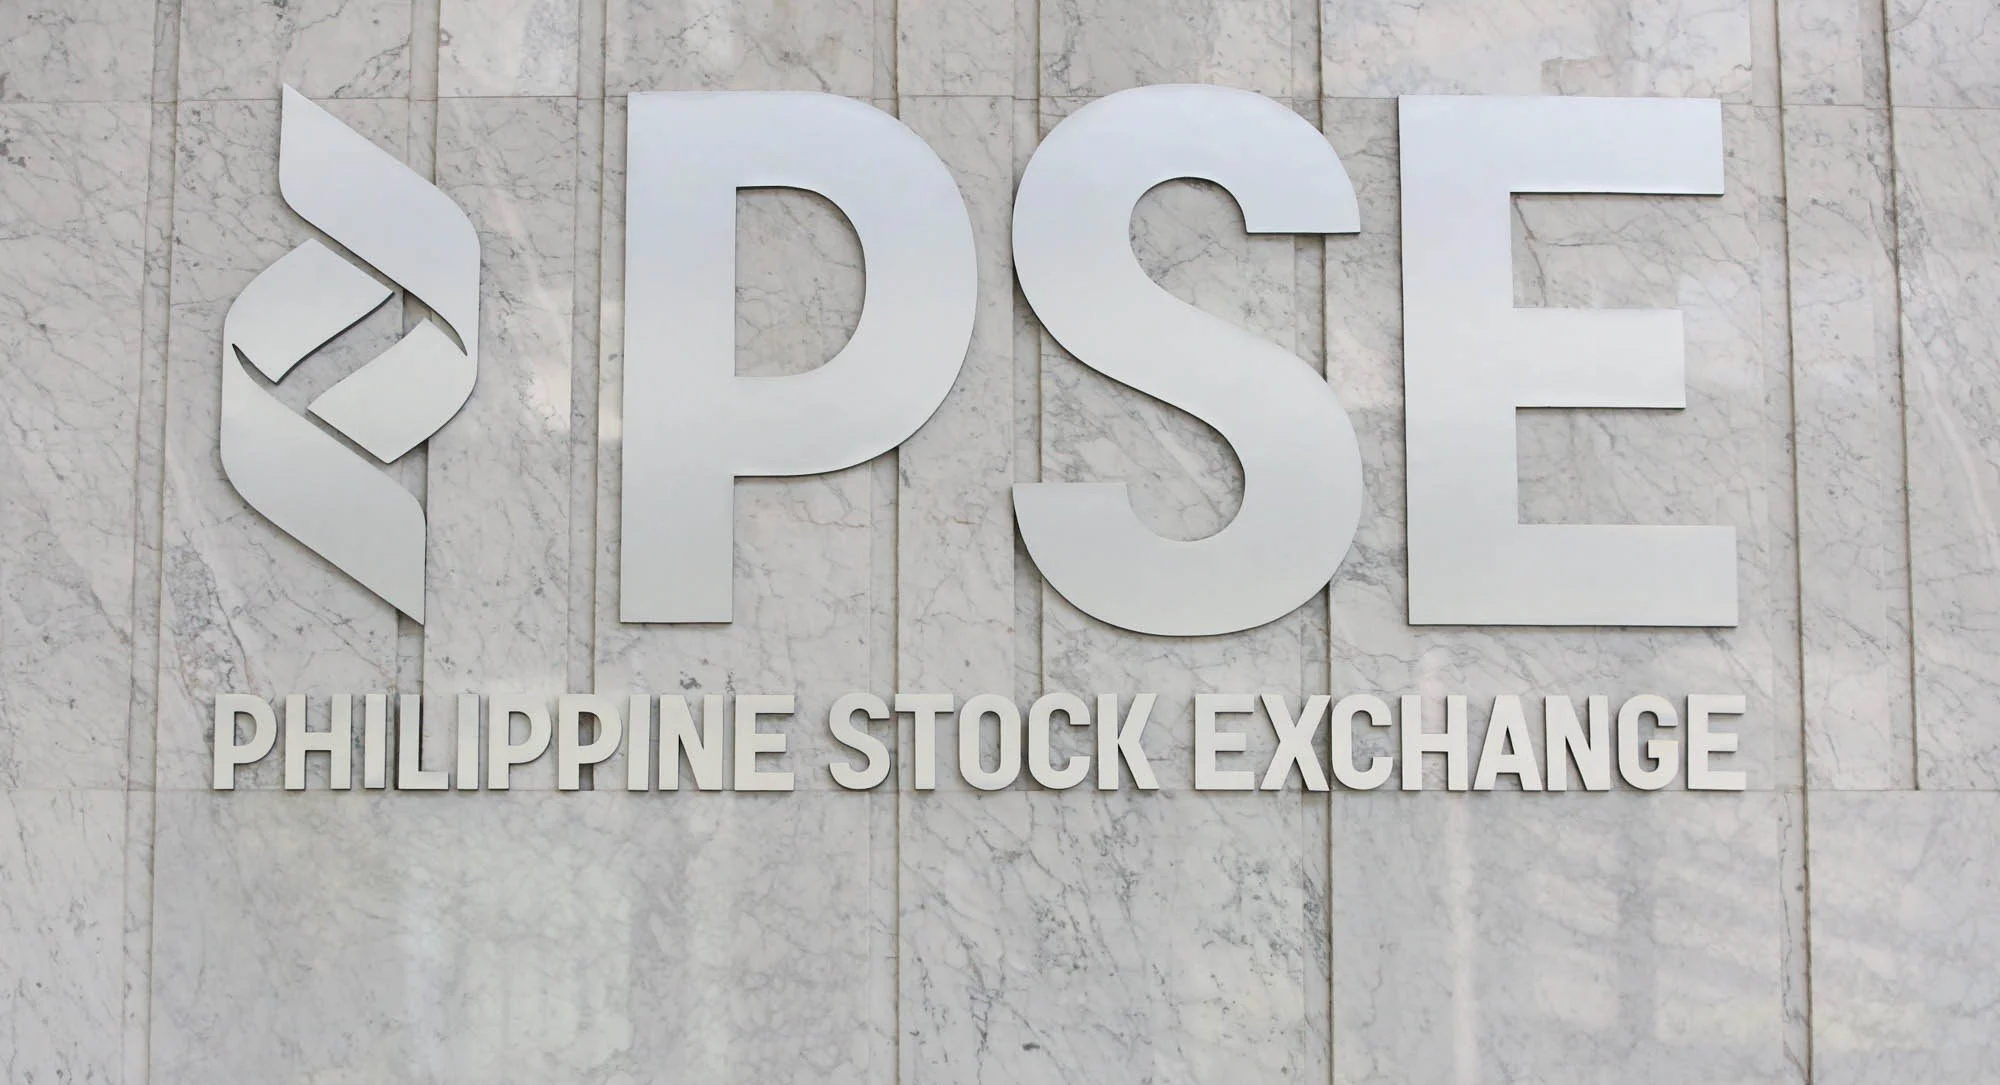 inflation fears keep weighing down on psei